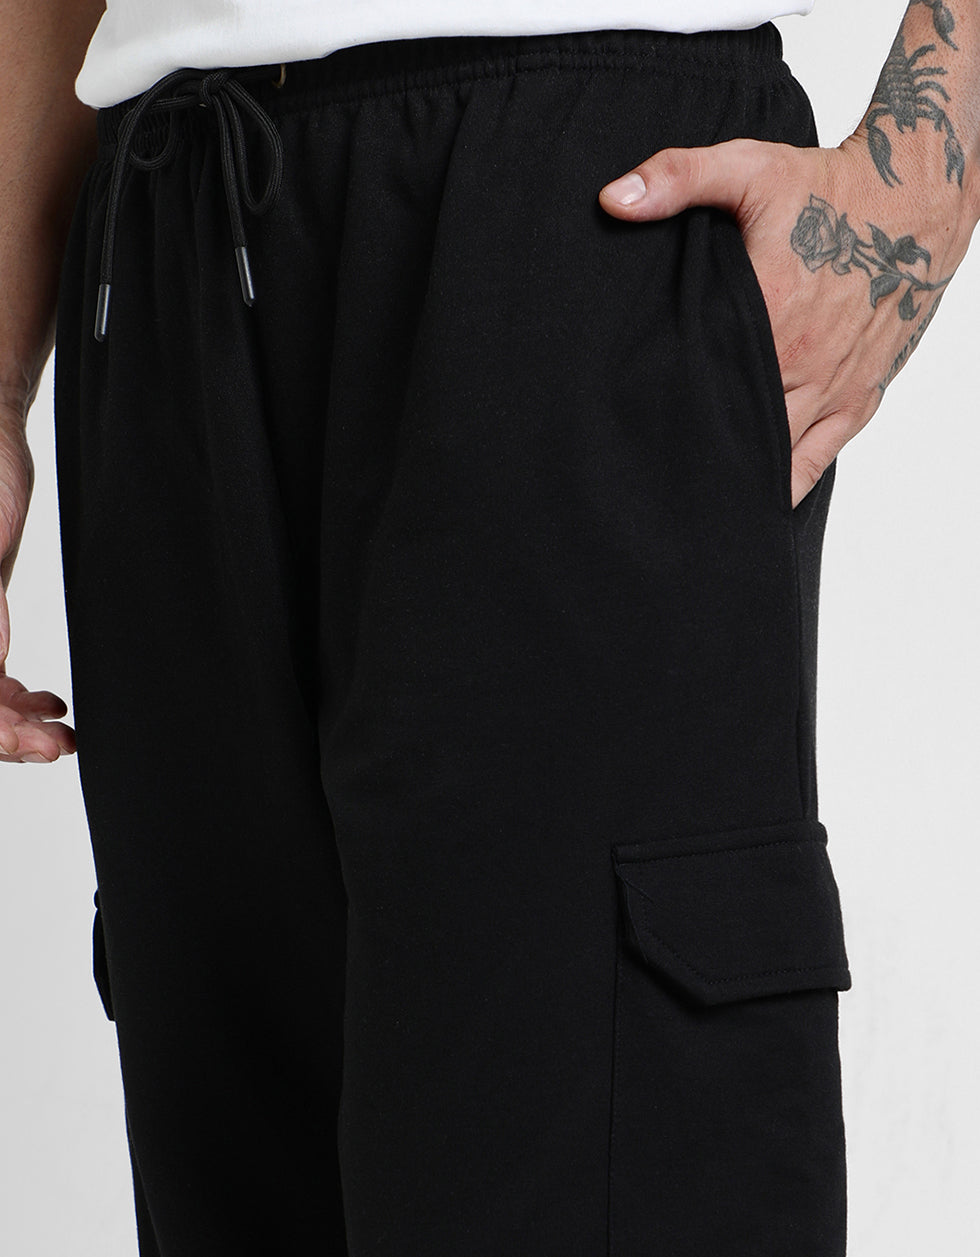 Black Solid Baggy Fit Cargo Pants